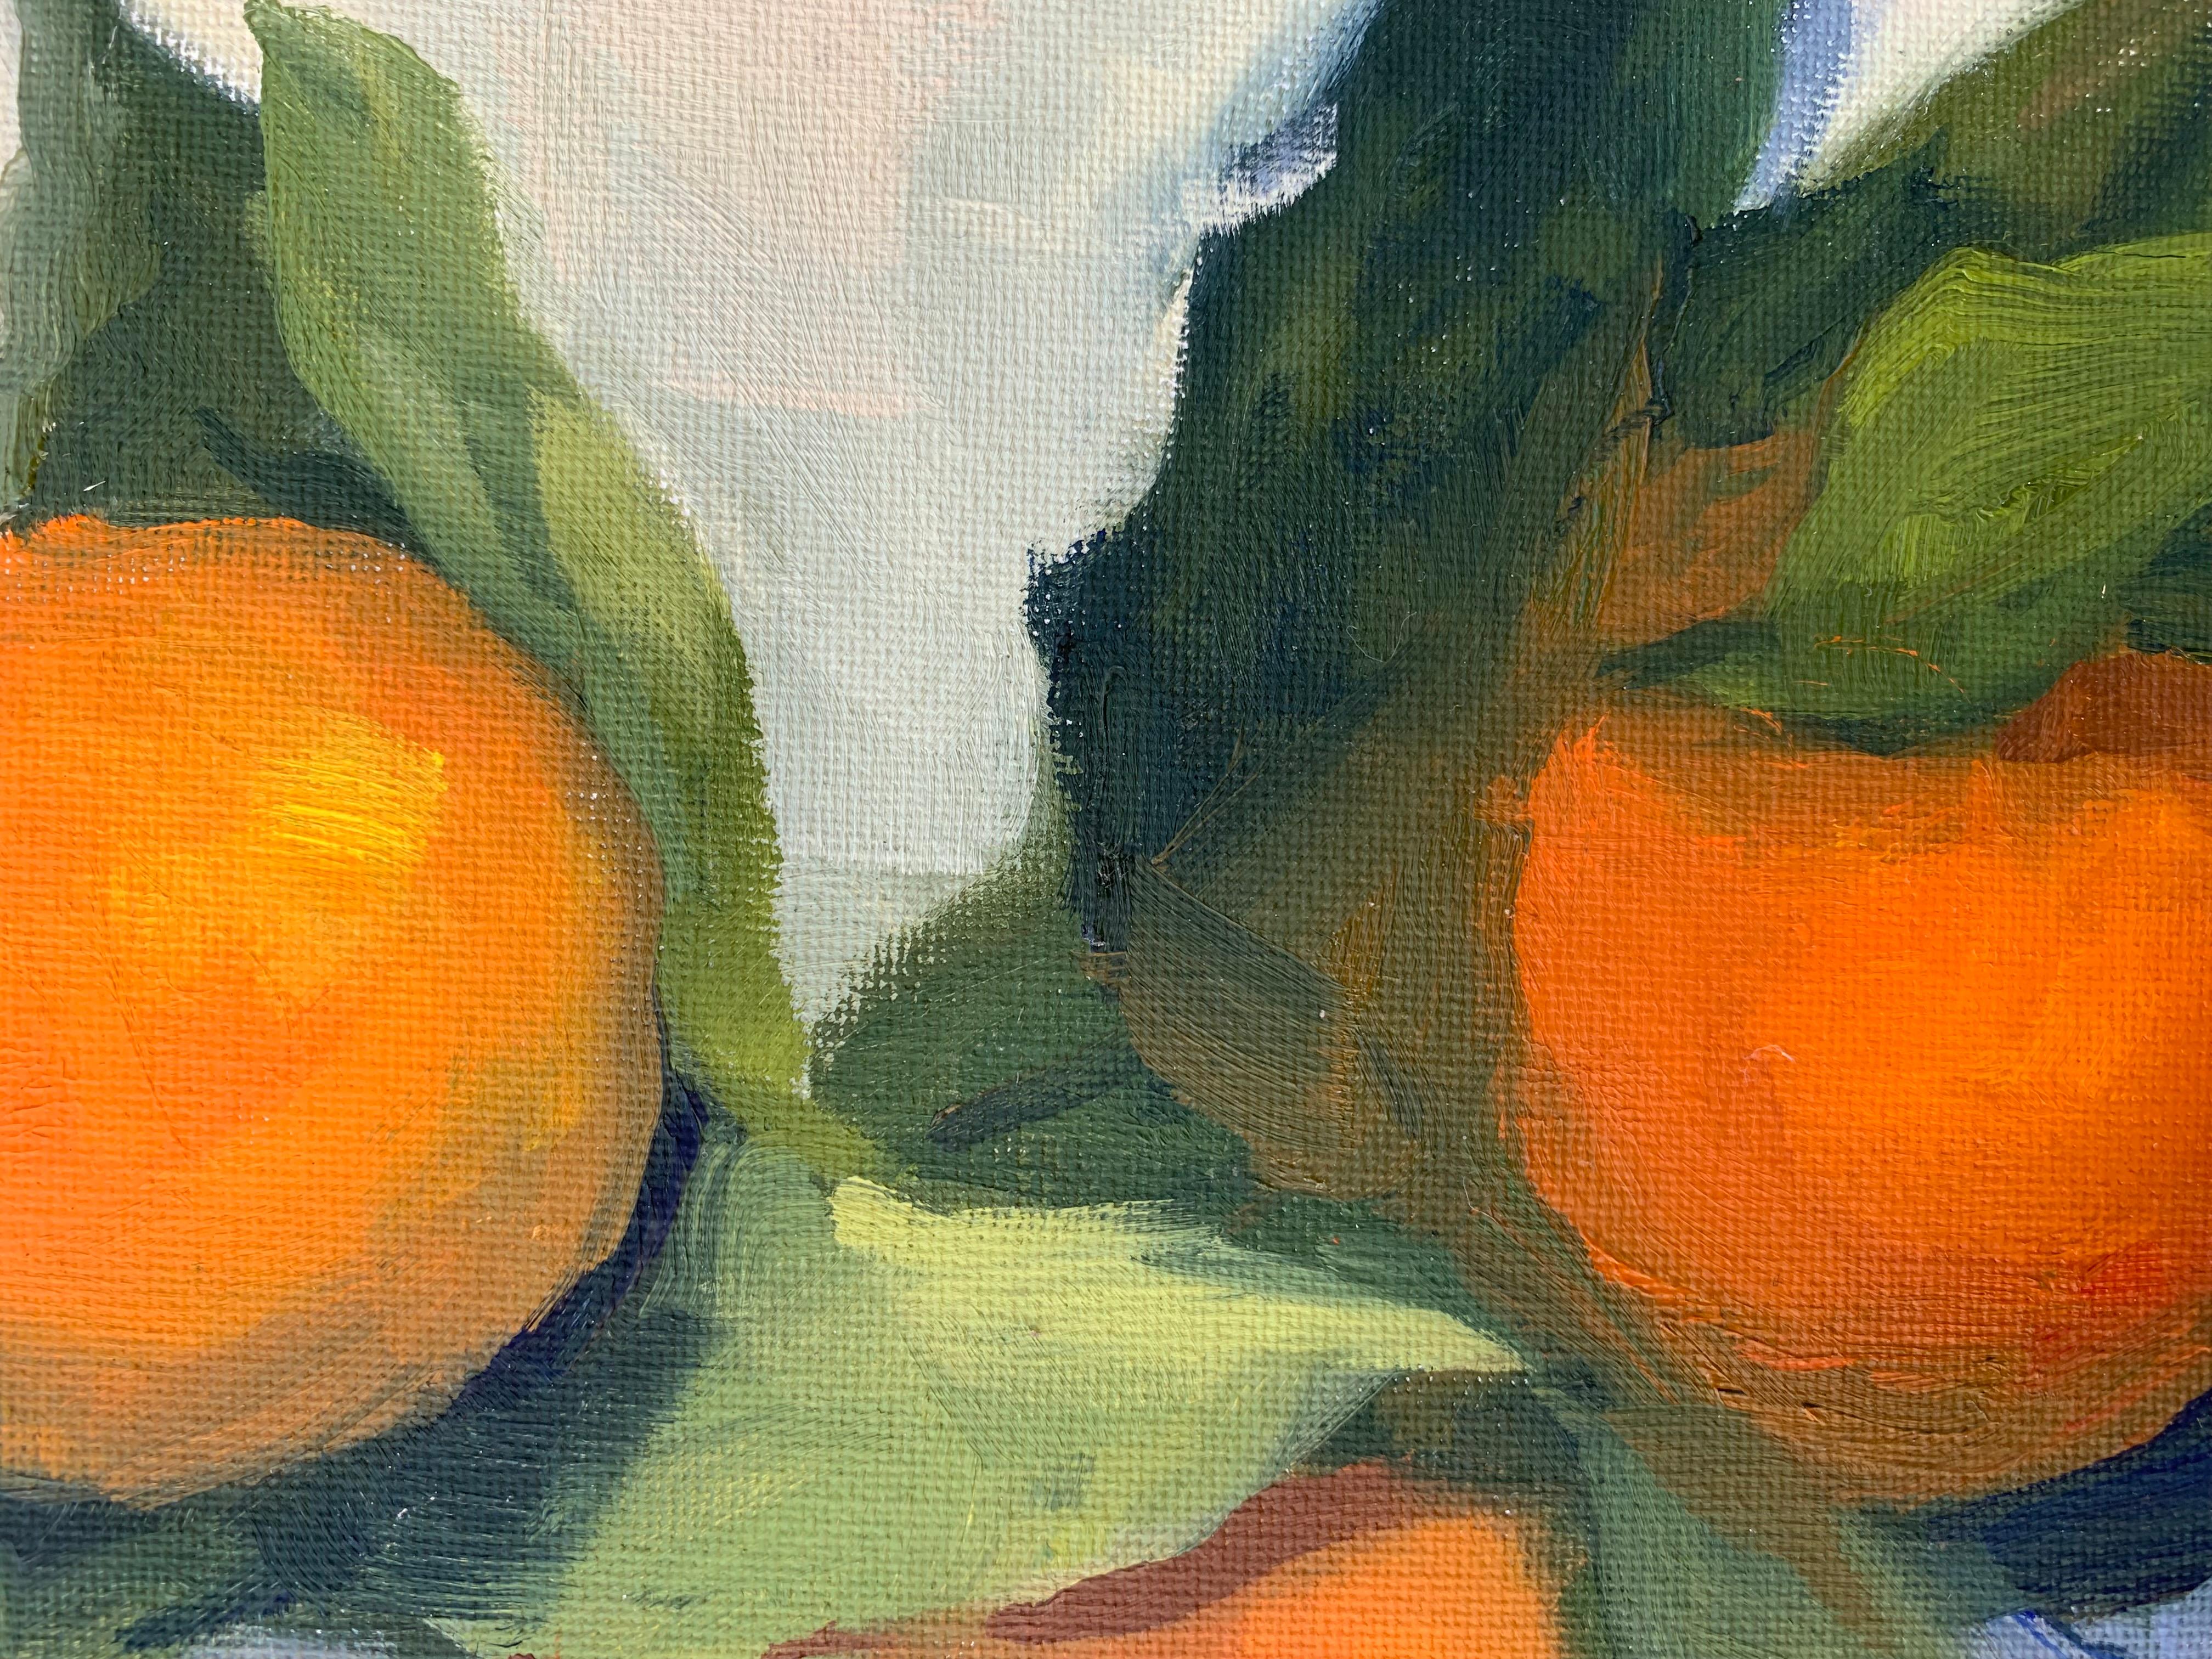 The Citrus Branch, Oil Painting - Abstract Impressionist Art by Malia Pettit